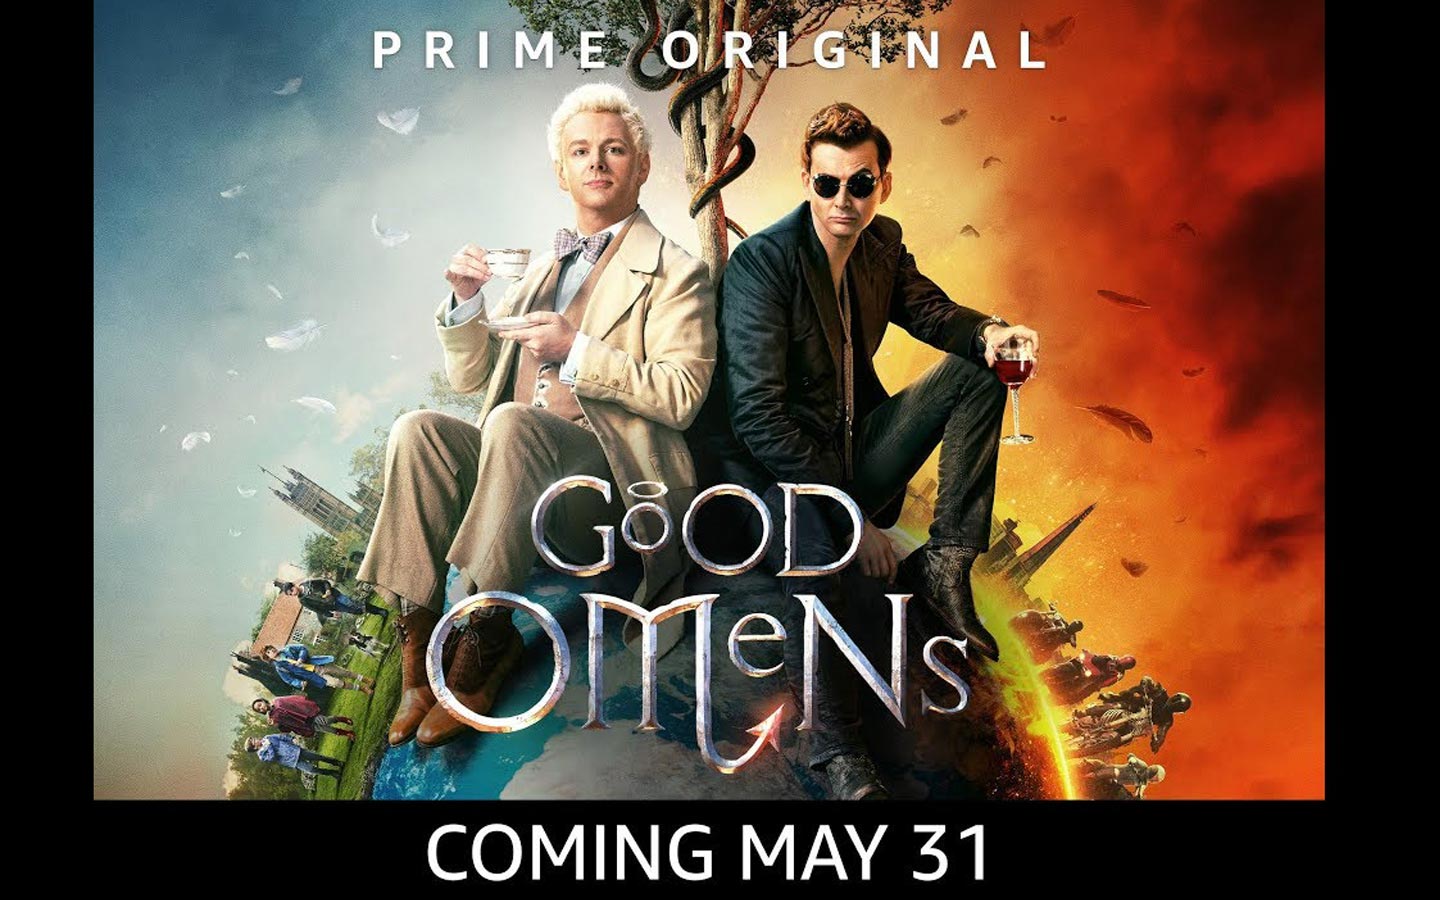 Lourdes Faberes in ‘Good Omens’